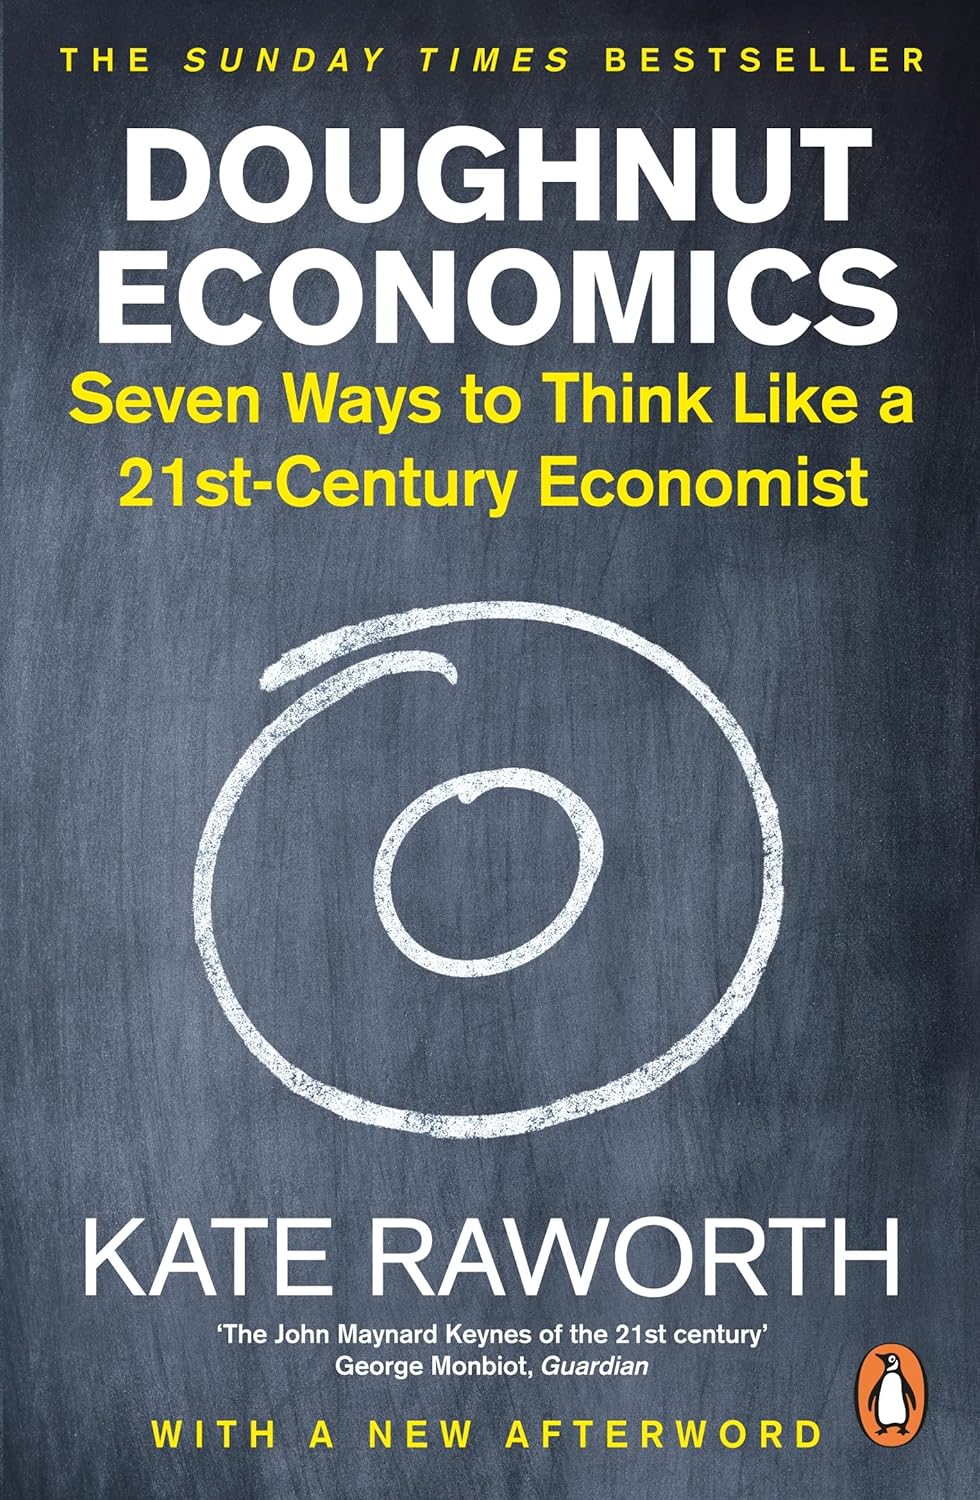 The book cover for Doughnut Economics has a chalkboard with a doughnut drawn in white. The title and author name are written in white/yellow text.